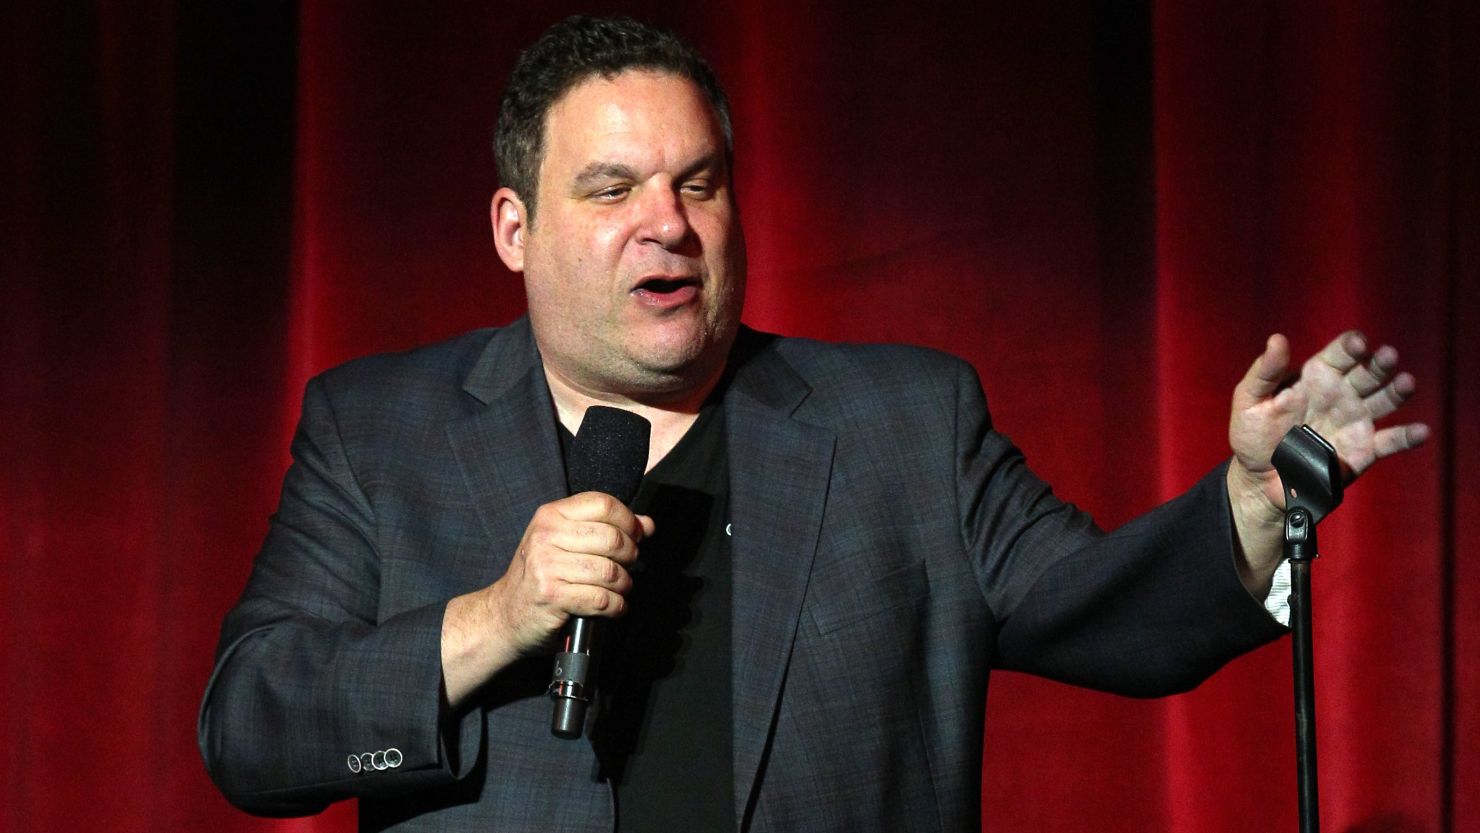 Jeff Garlin's "By the Way, In Conversation with Jeff Garlin" podcast will soon debut on the Earwolf Podcast Network.